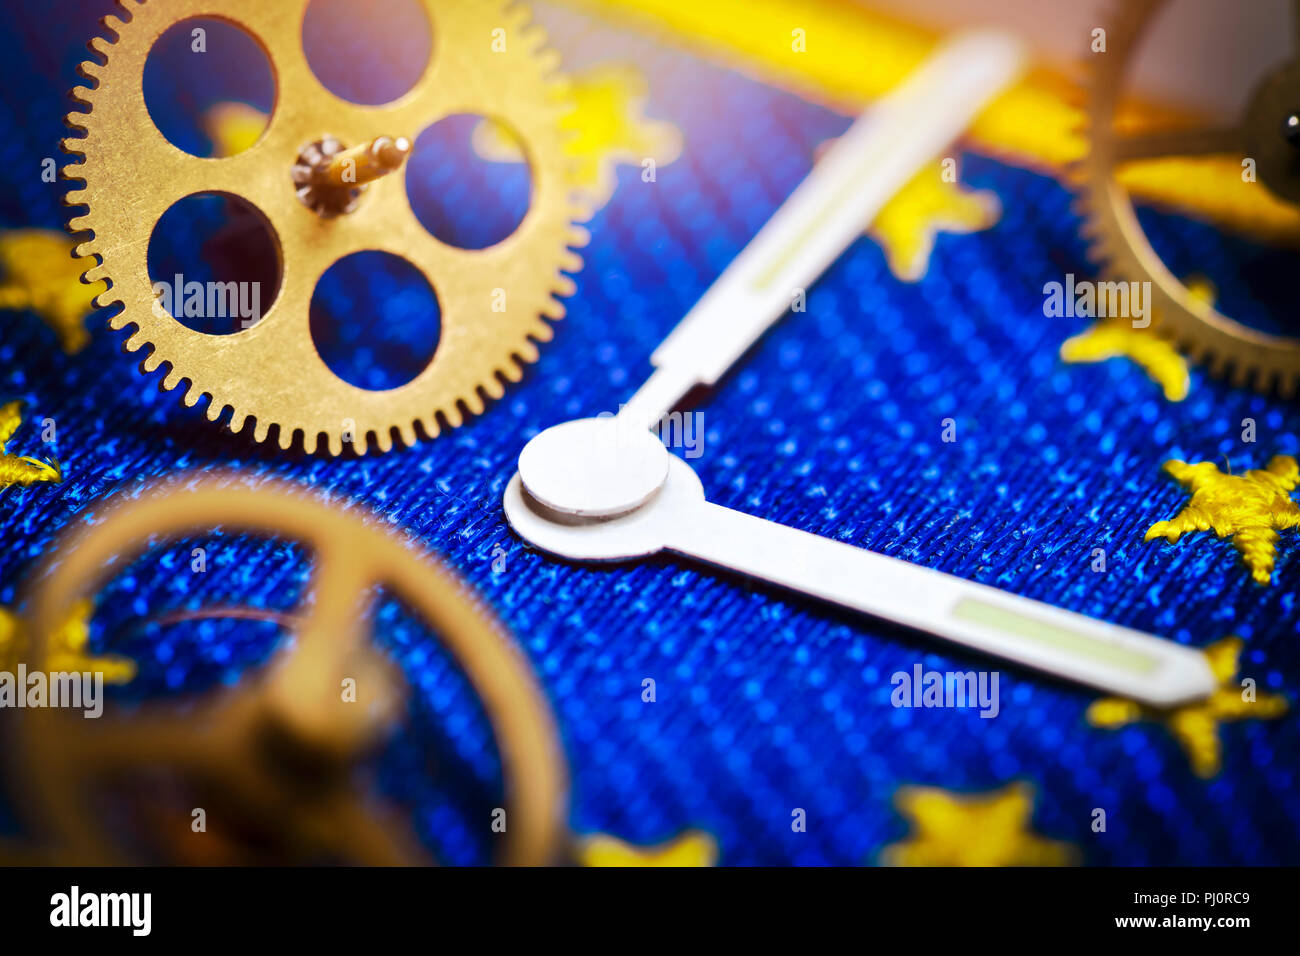 Watch hands and gear wheels on EU flag, end of changing clocks in the EU Stock Photo